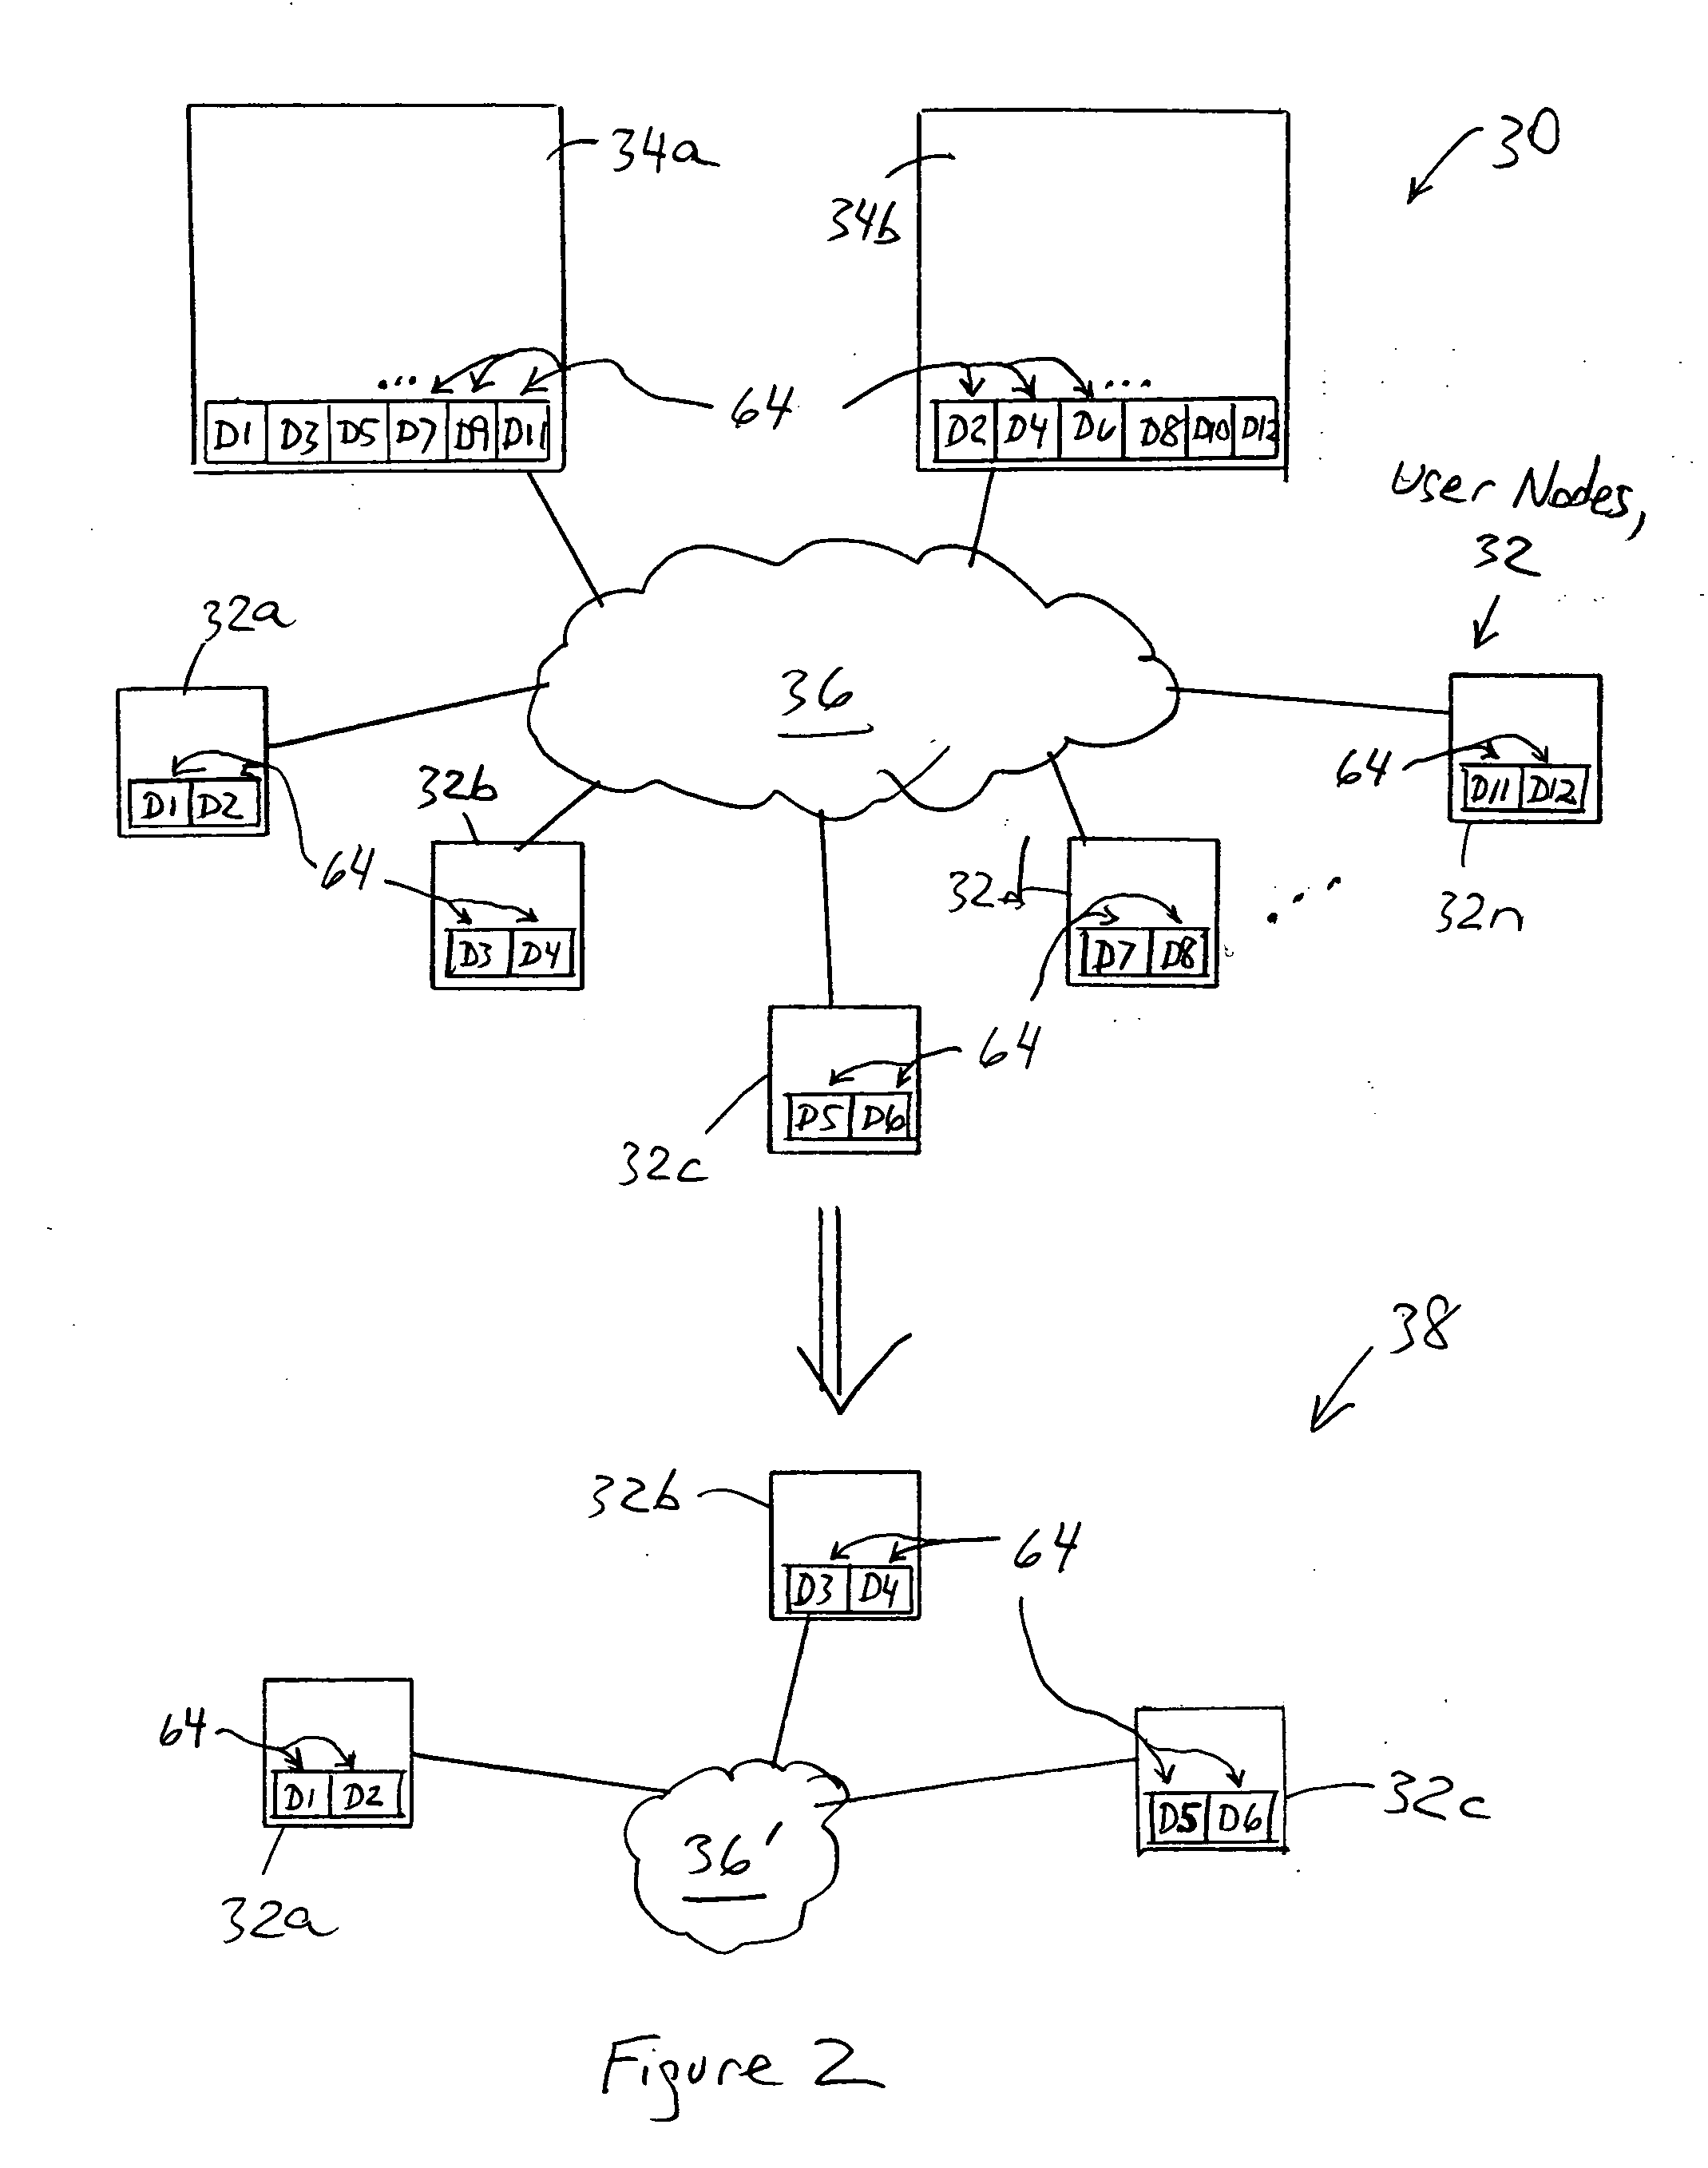 Arrangement for recovery of data by network nodes based on retrieval of encoded data distributed among the network nodes